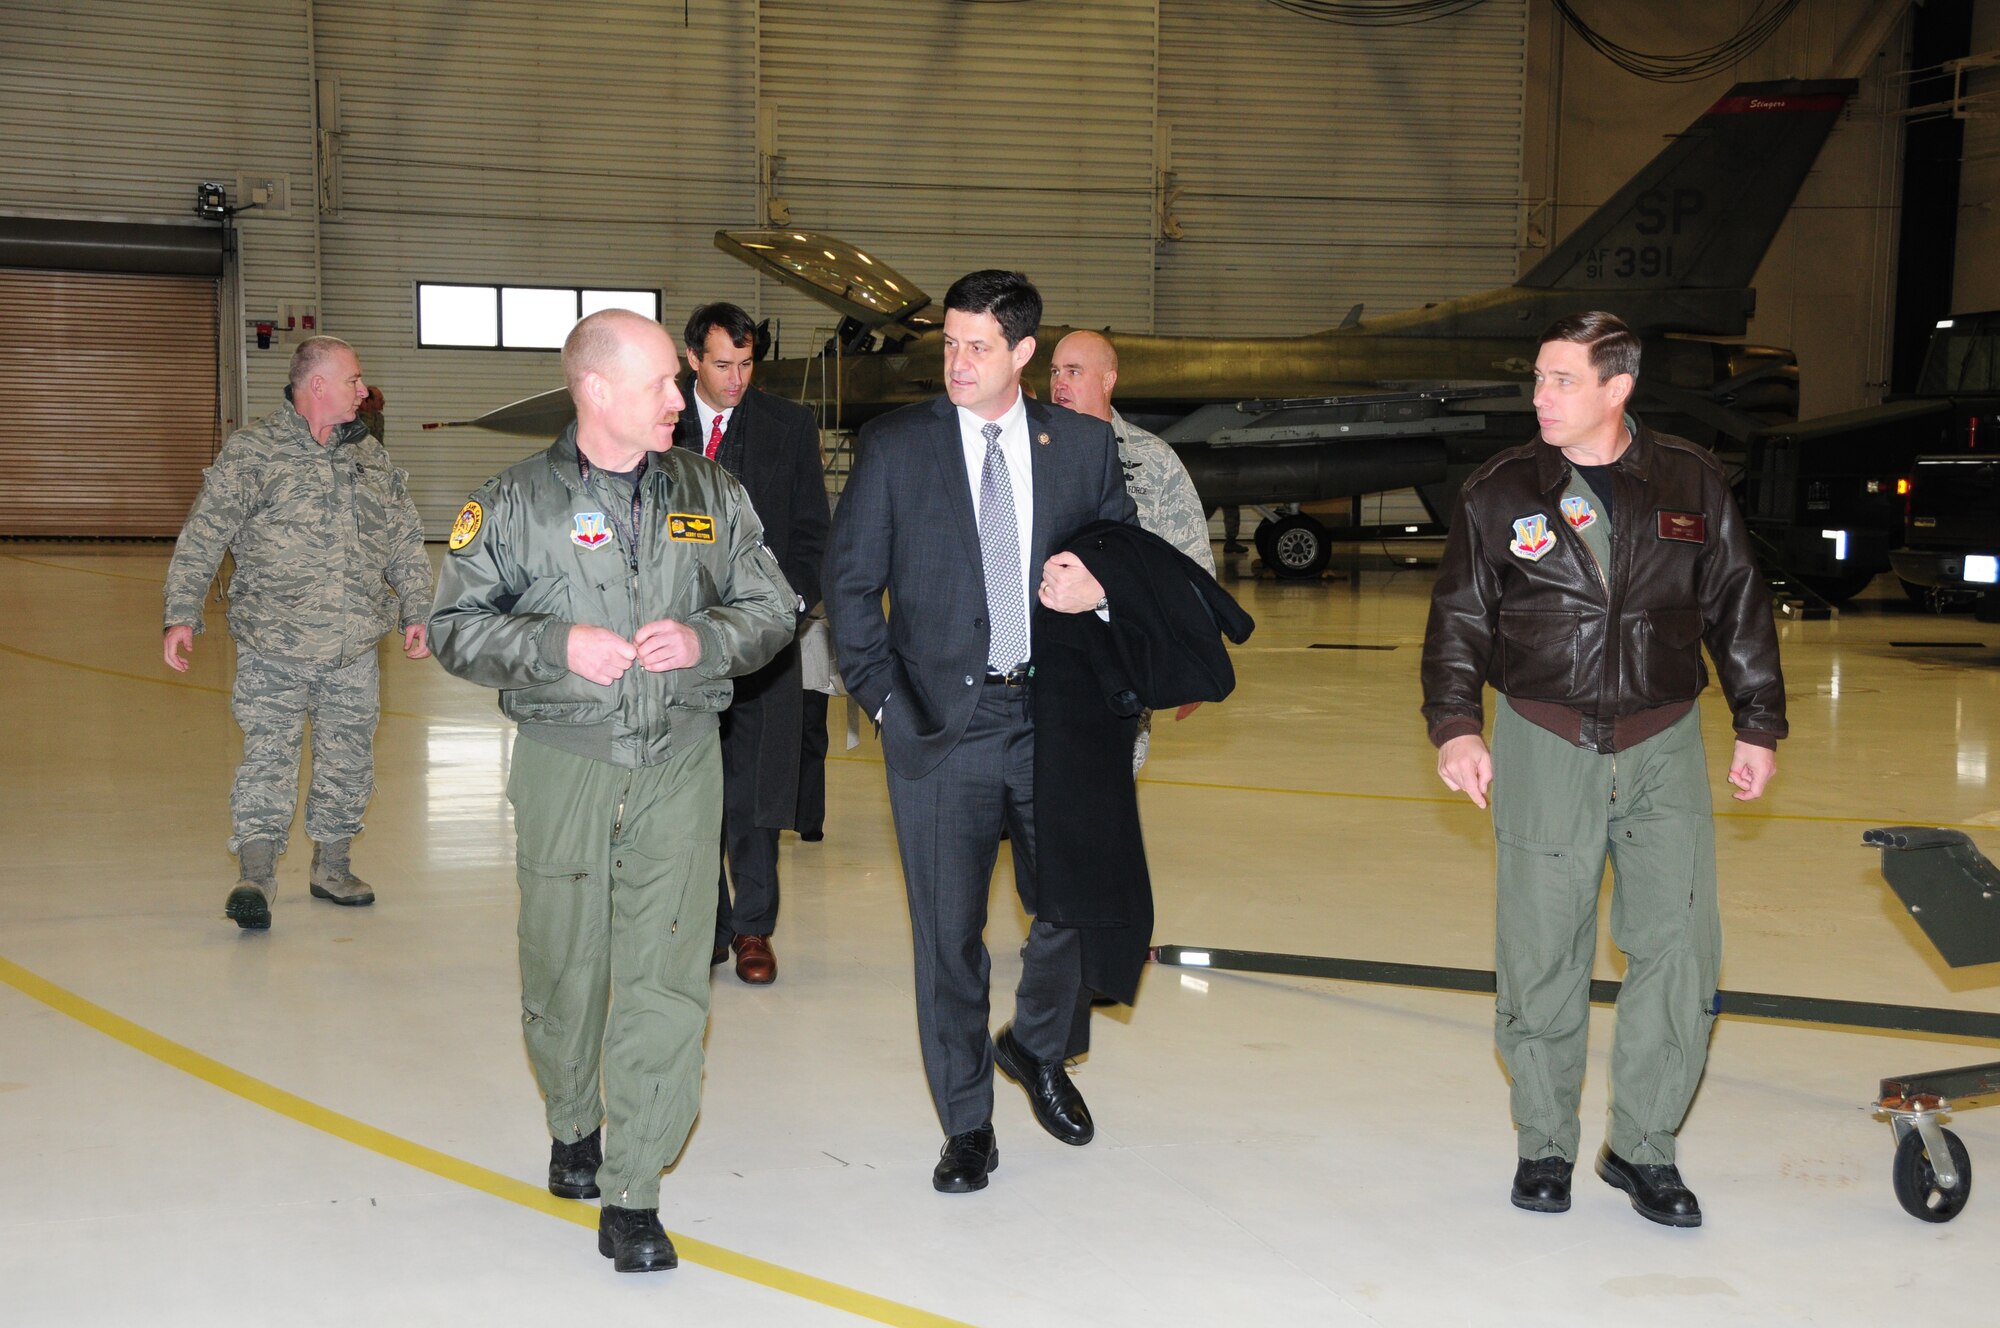 Col. Gerald Ostern, 148th Fighter Wing, Operations Group Commander (left) and Col. Frank Stokes, 148th Fighter Wing, Wing Commander (right) talk with Congressman Cravaack while touring the 148th Fighter Wing in Duluth, Minn.  Congressman Cravaack is visiting the 148th FW less than one month after being sworn into office.  (U.S. Air Force photo by Master Sgt. Ralph J. Kapustka)  